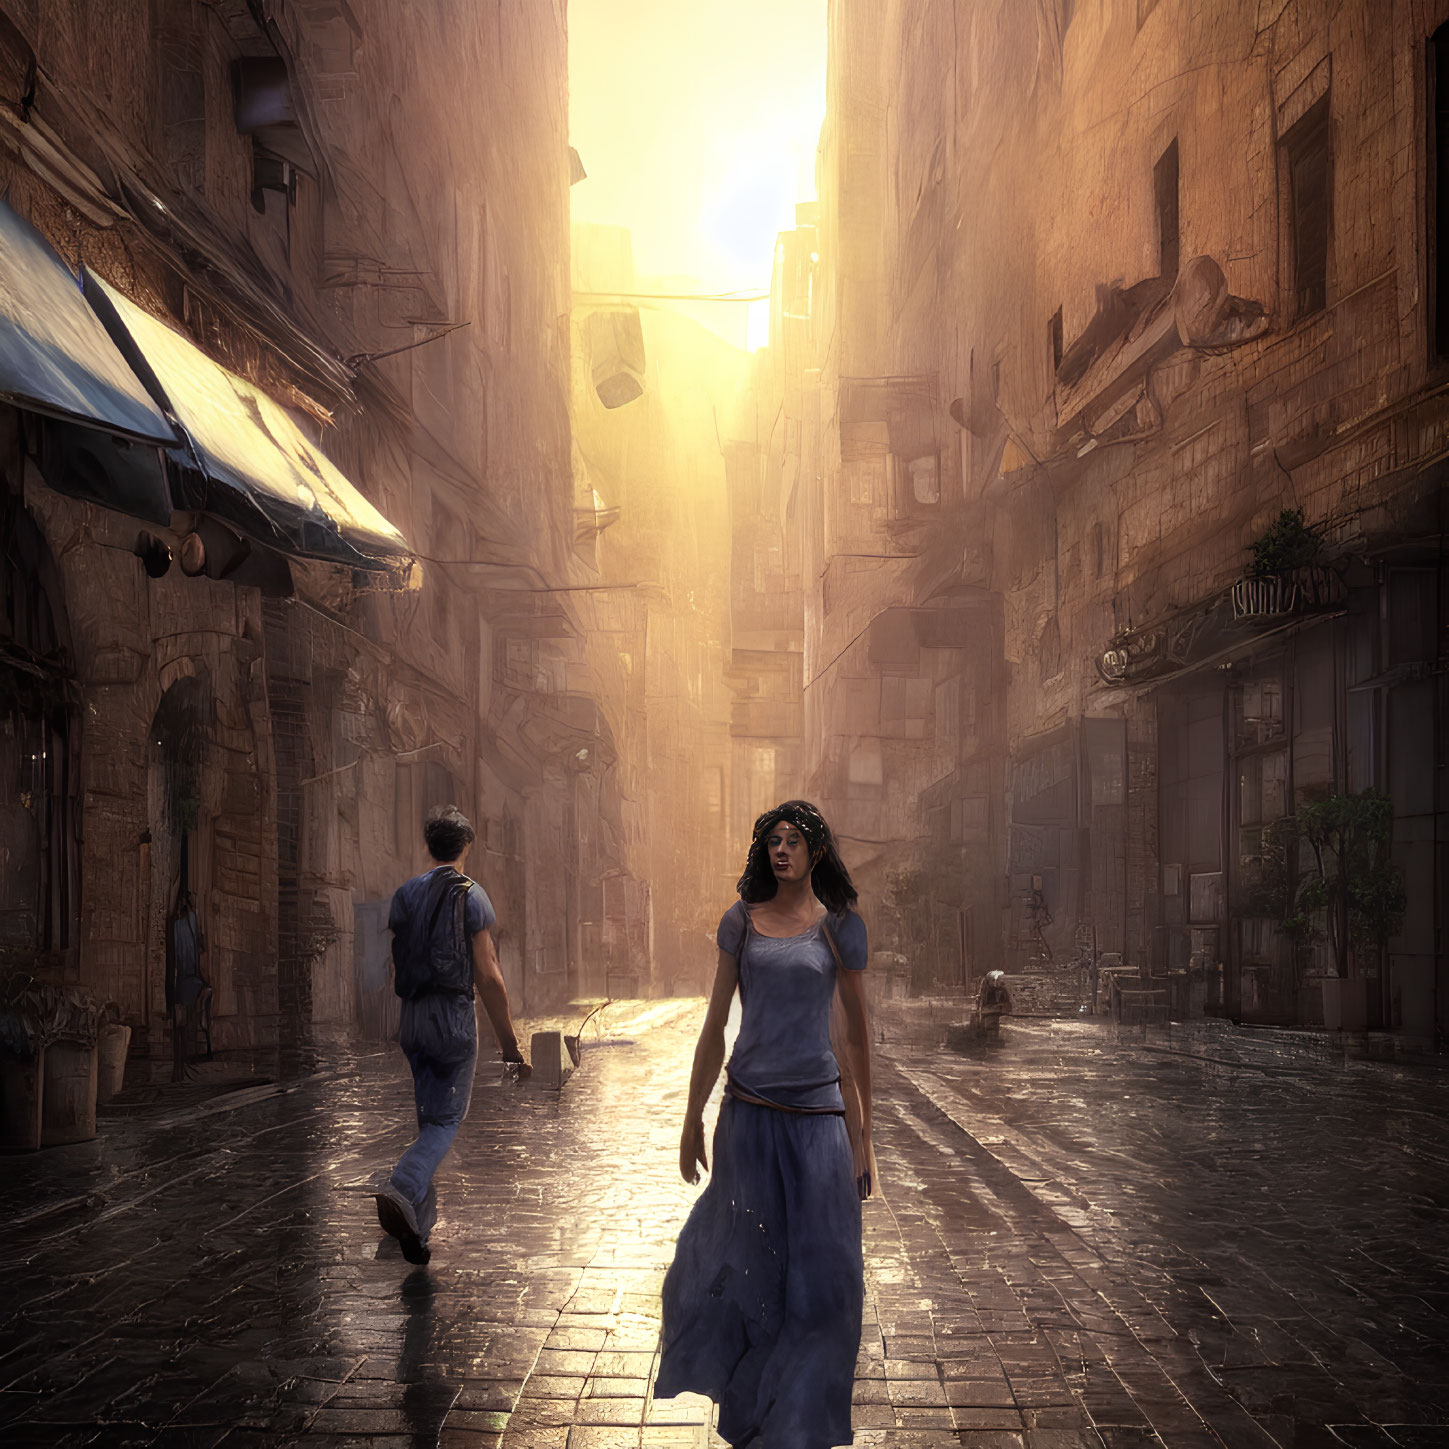 Woman in blue dress in sunlit alley with man walking away among old buildings.